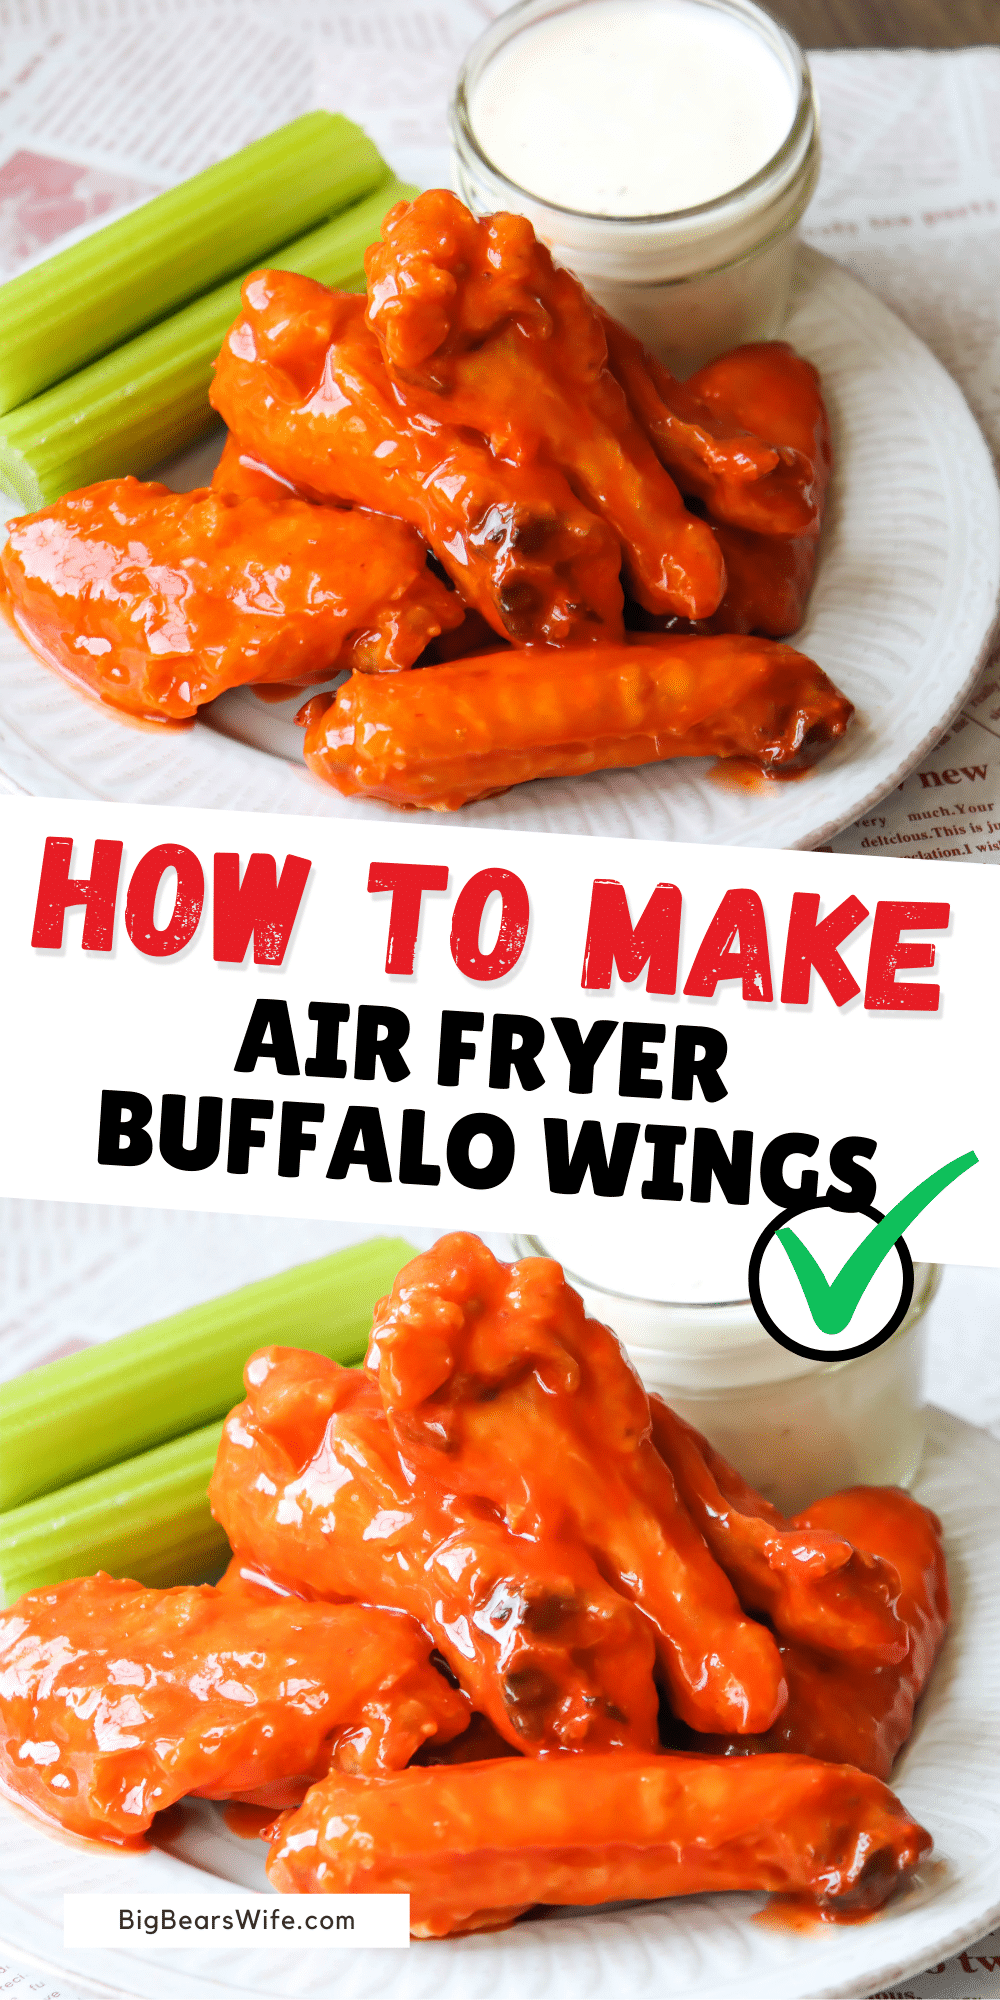 This Amazing Air Fryer Buffalo Wings recipe is going to be a favorite from now on! Crispy chicken wings cooked in the air fryer are coated in homemade buffalo sauce and served with ranch to make the best buffalo wings!  via @bigbearswife